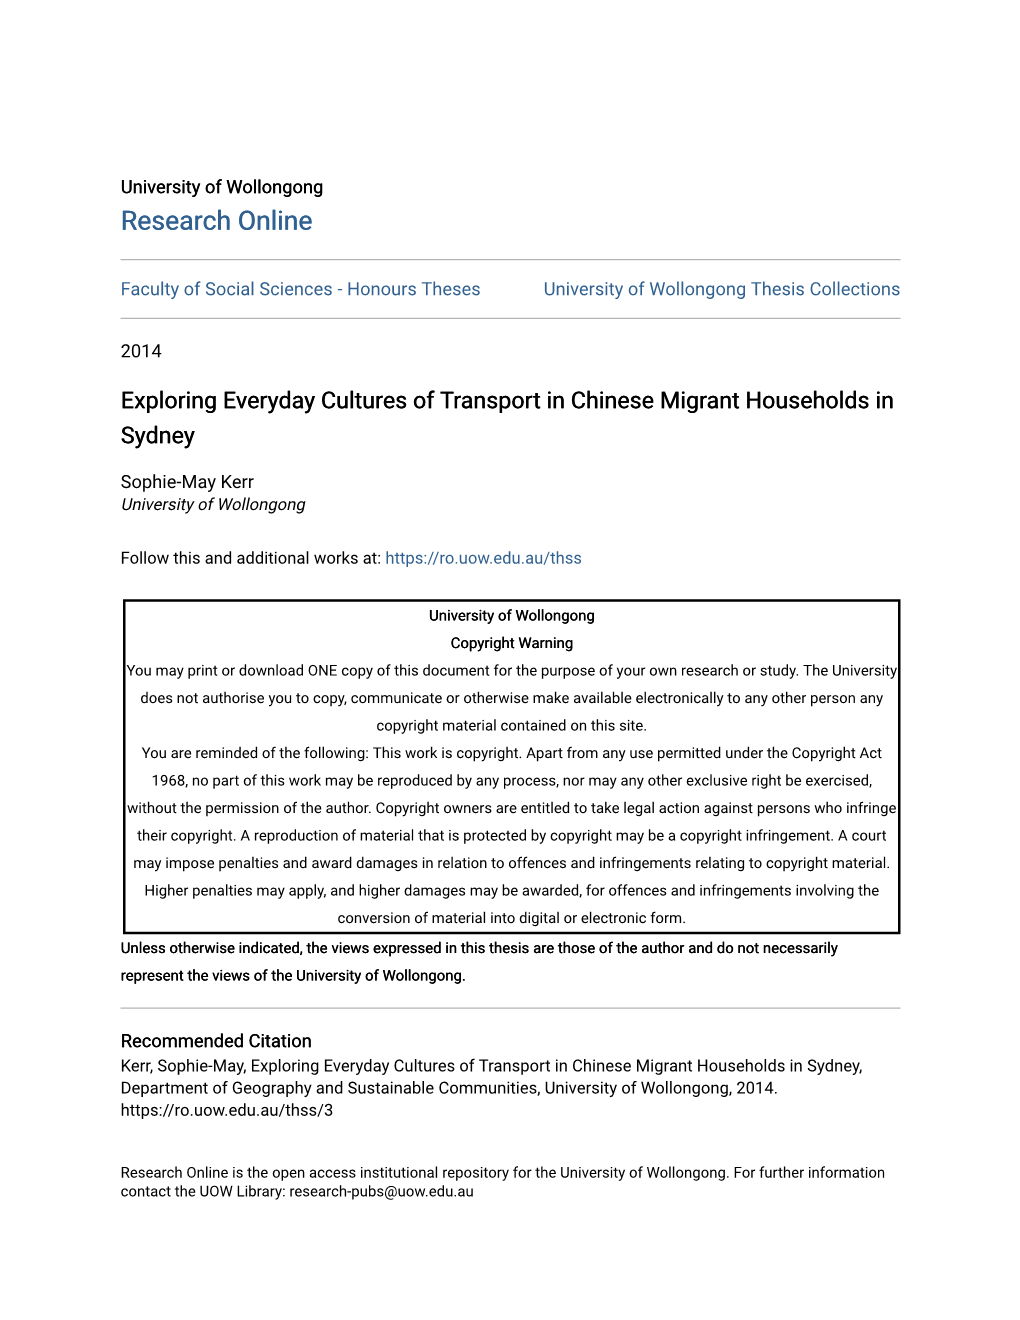 Exploring Everyday Cultures of Transport in Chinese Migrant Households in Sydney